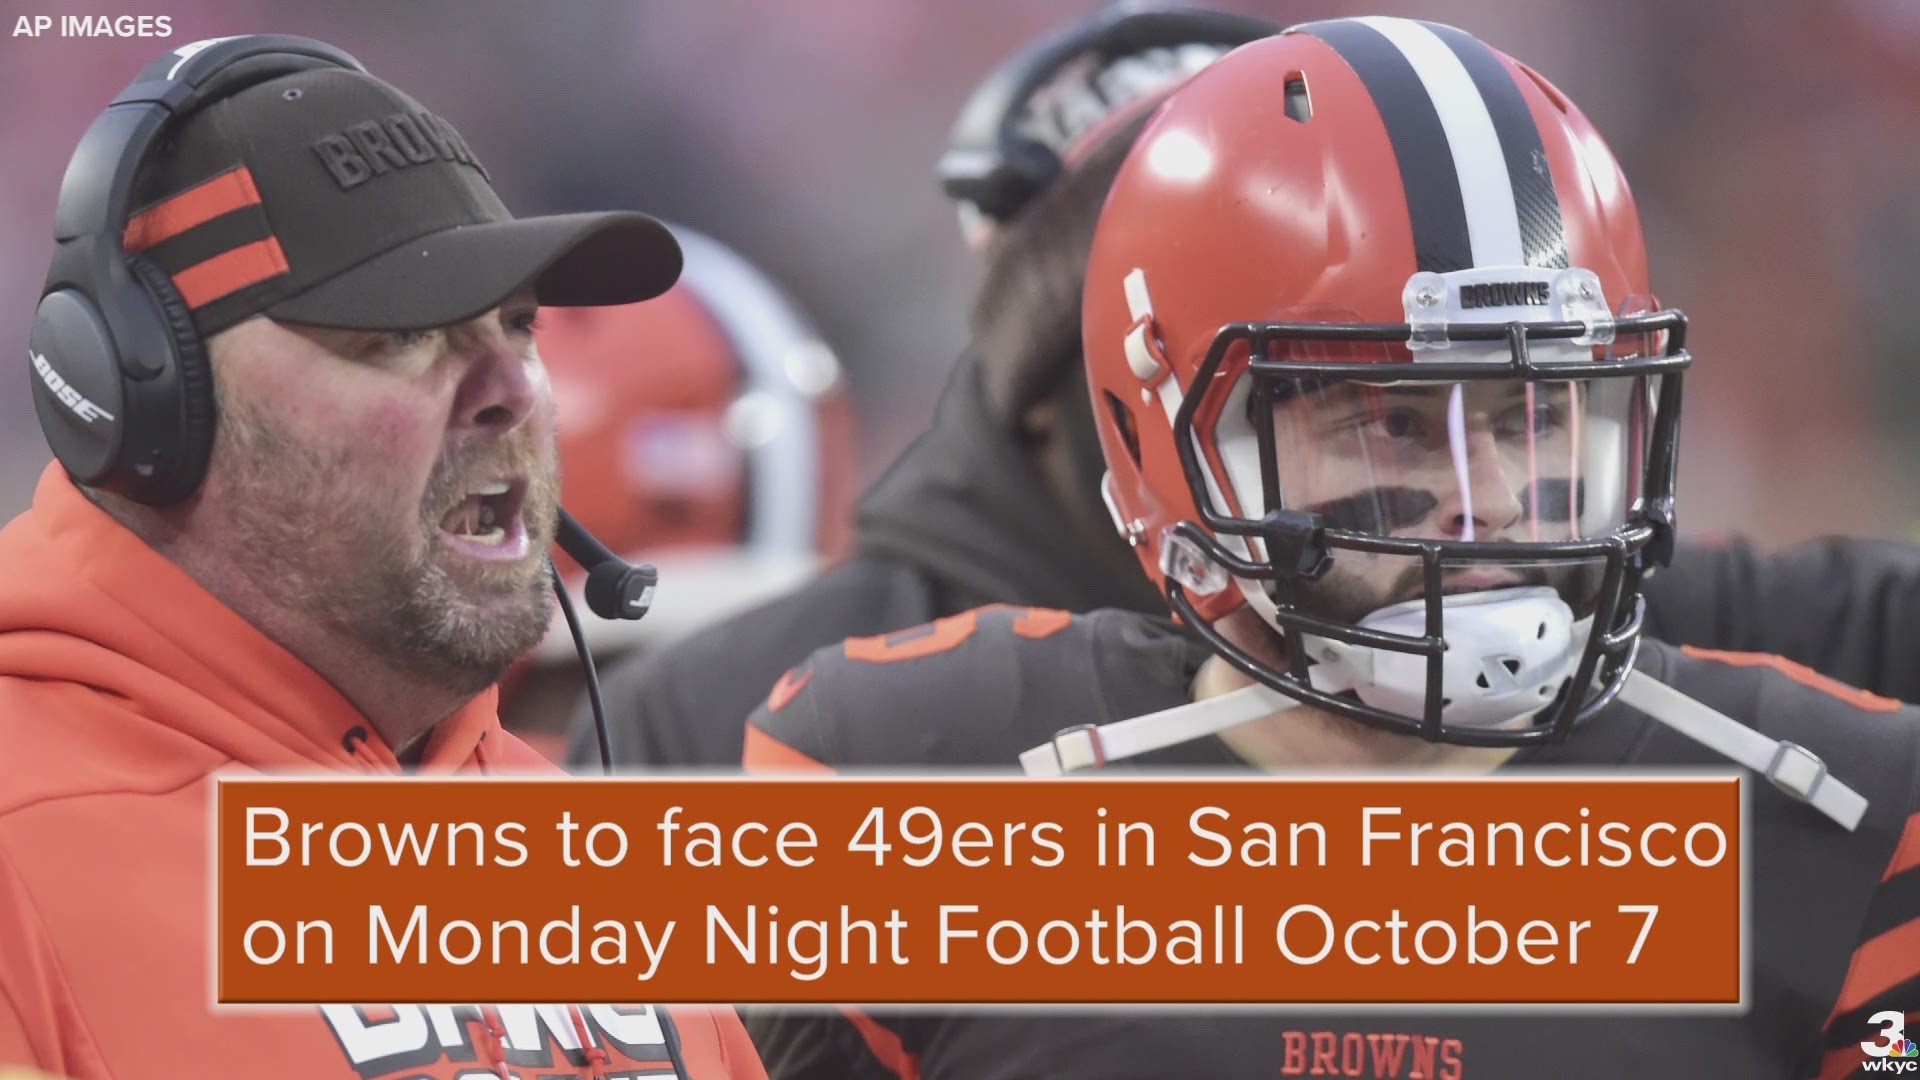 The Cleveland Browns will play their second of two Monday Night Football games on Oct. 7 when they face the San Francisco 49ers.